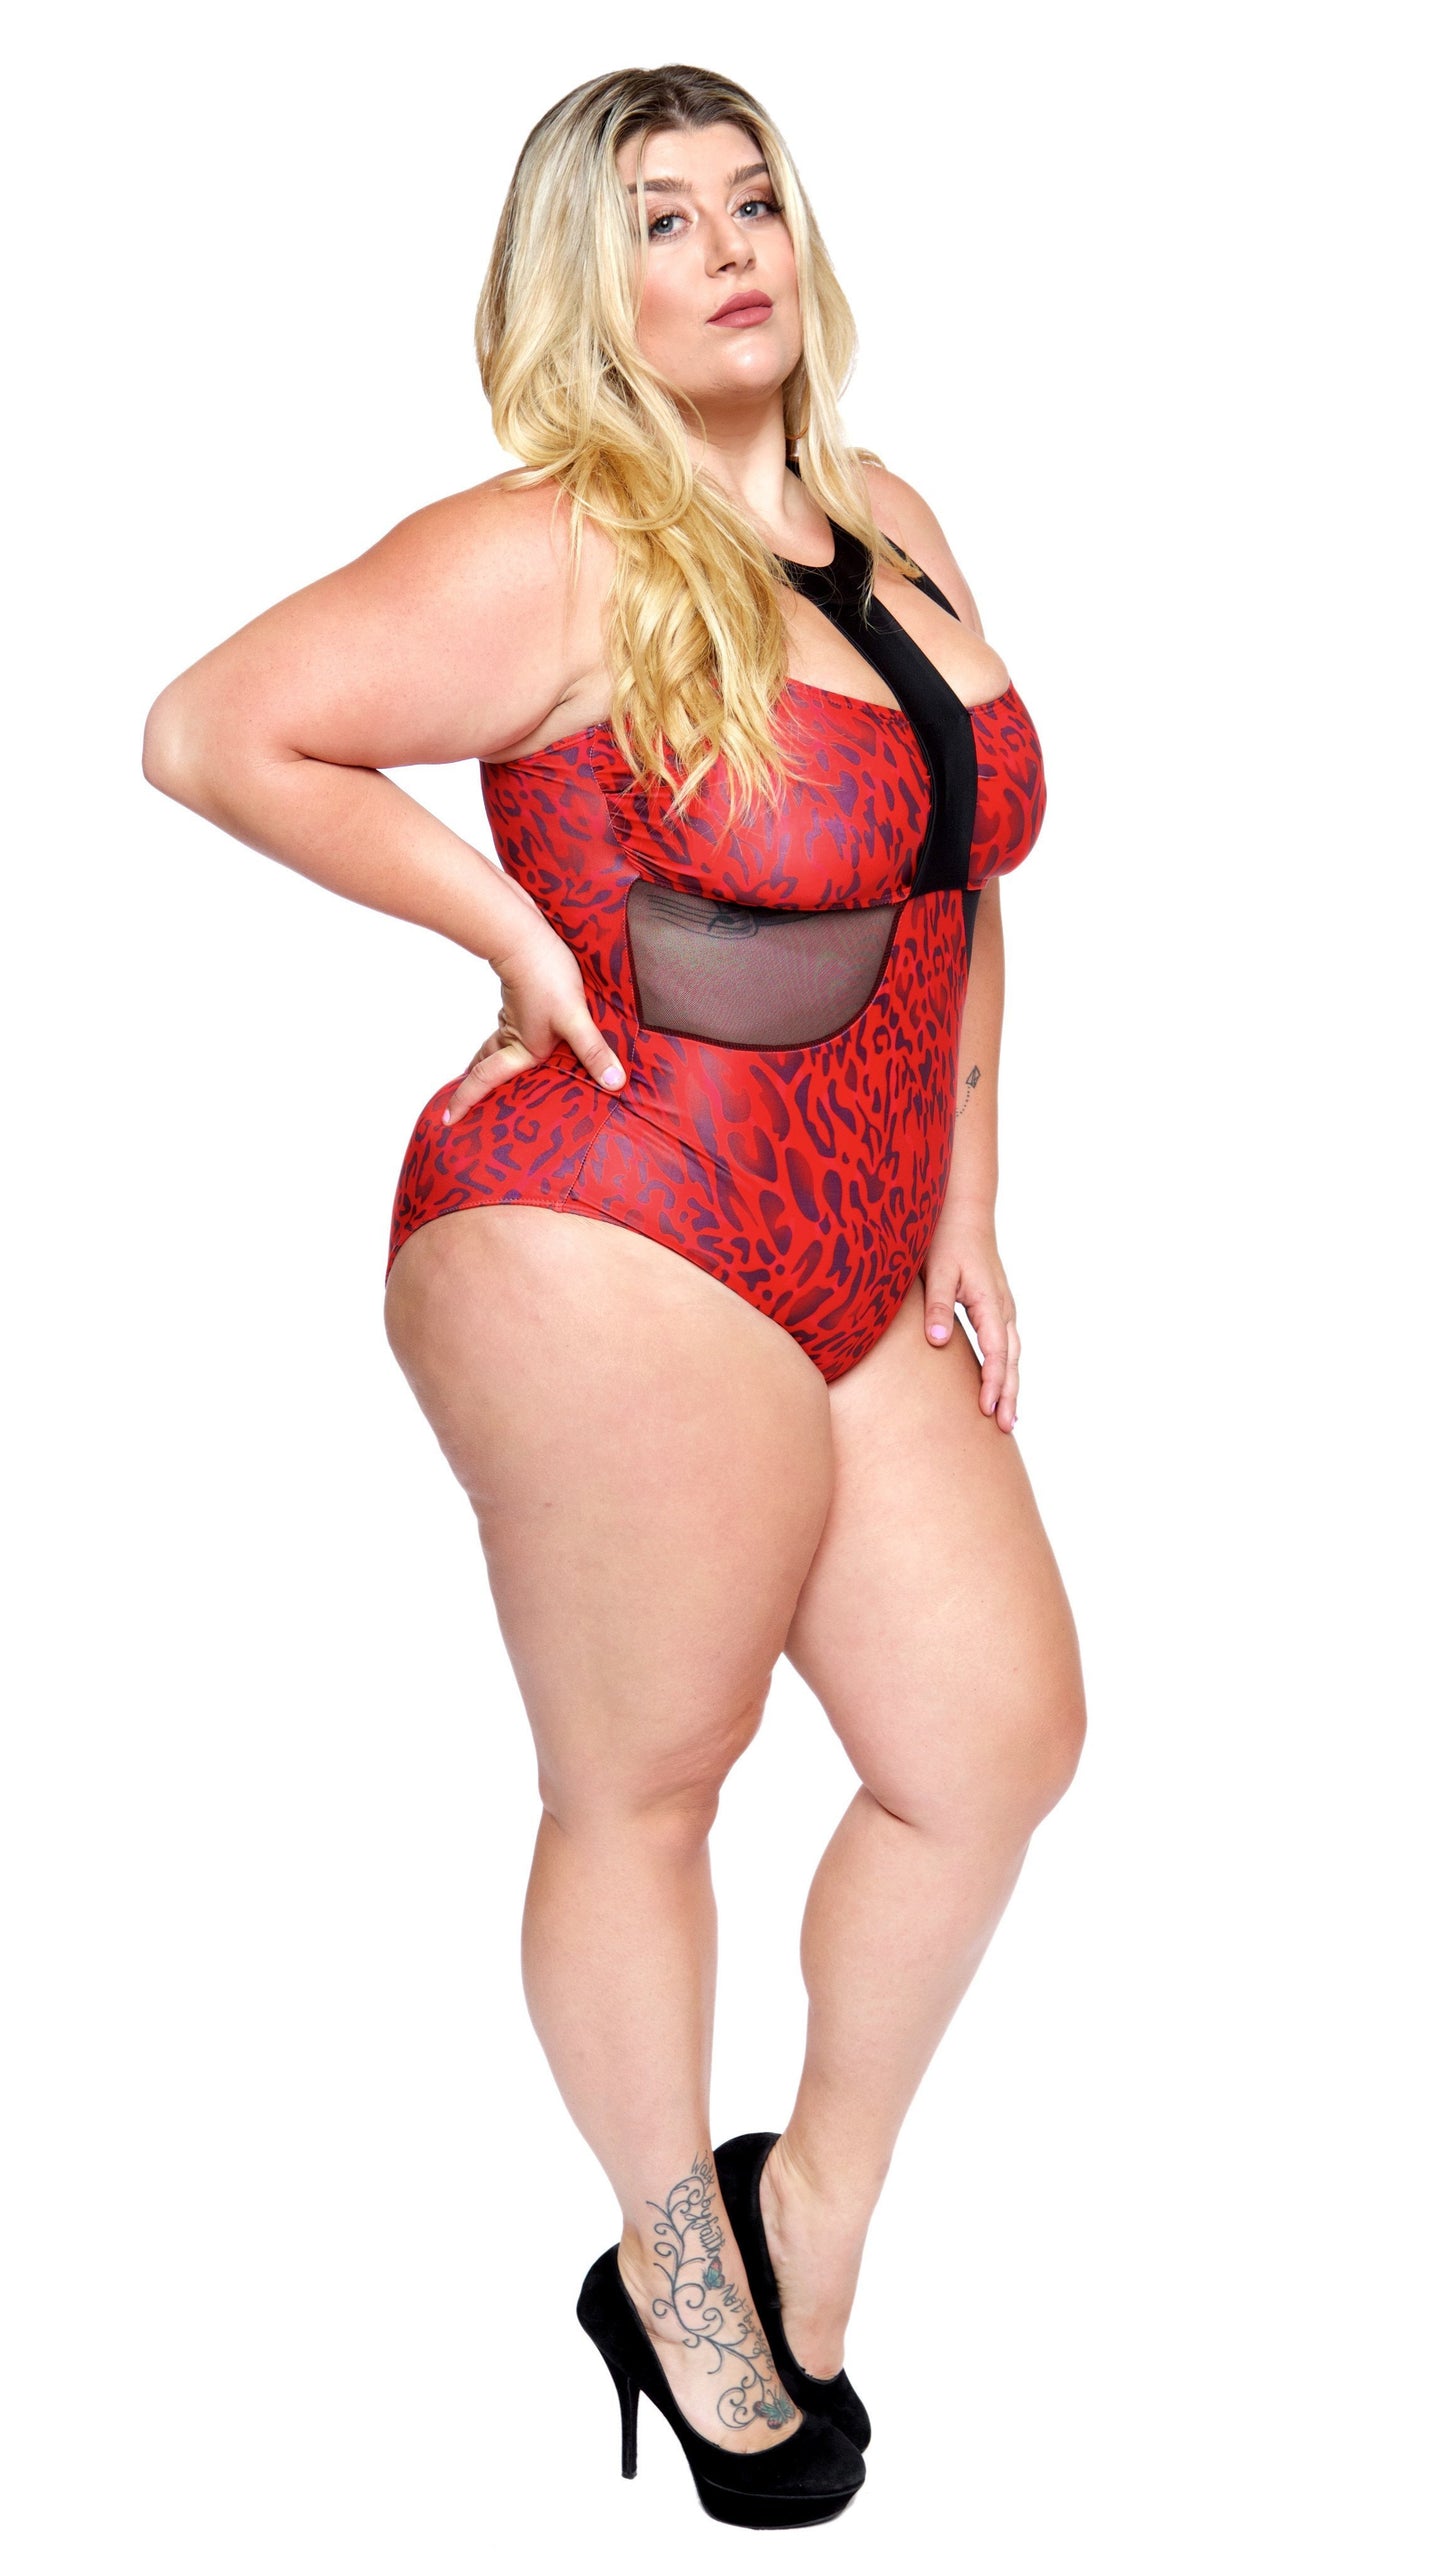 Vicious One Piece Bathing Suit (Red Leopard)-Swimwear-Boughie-Boughie